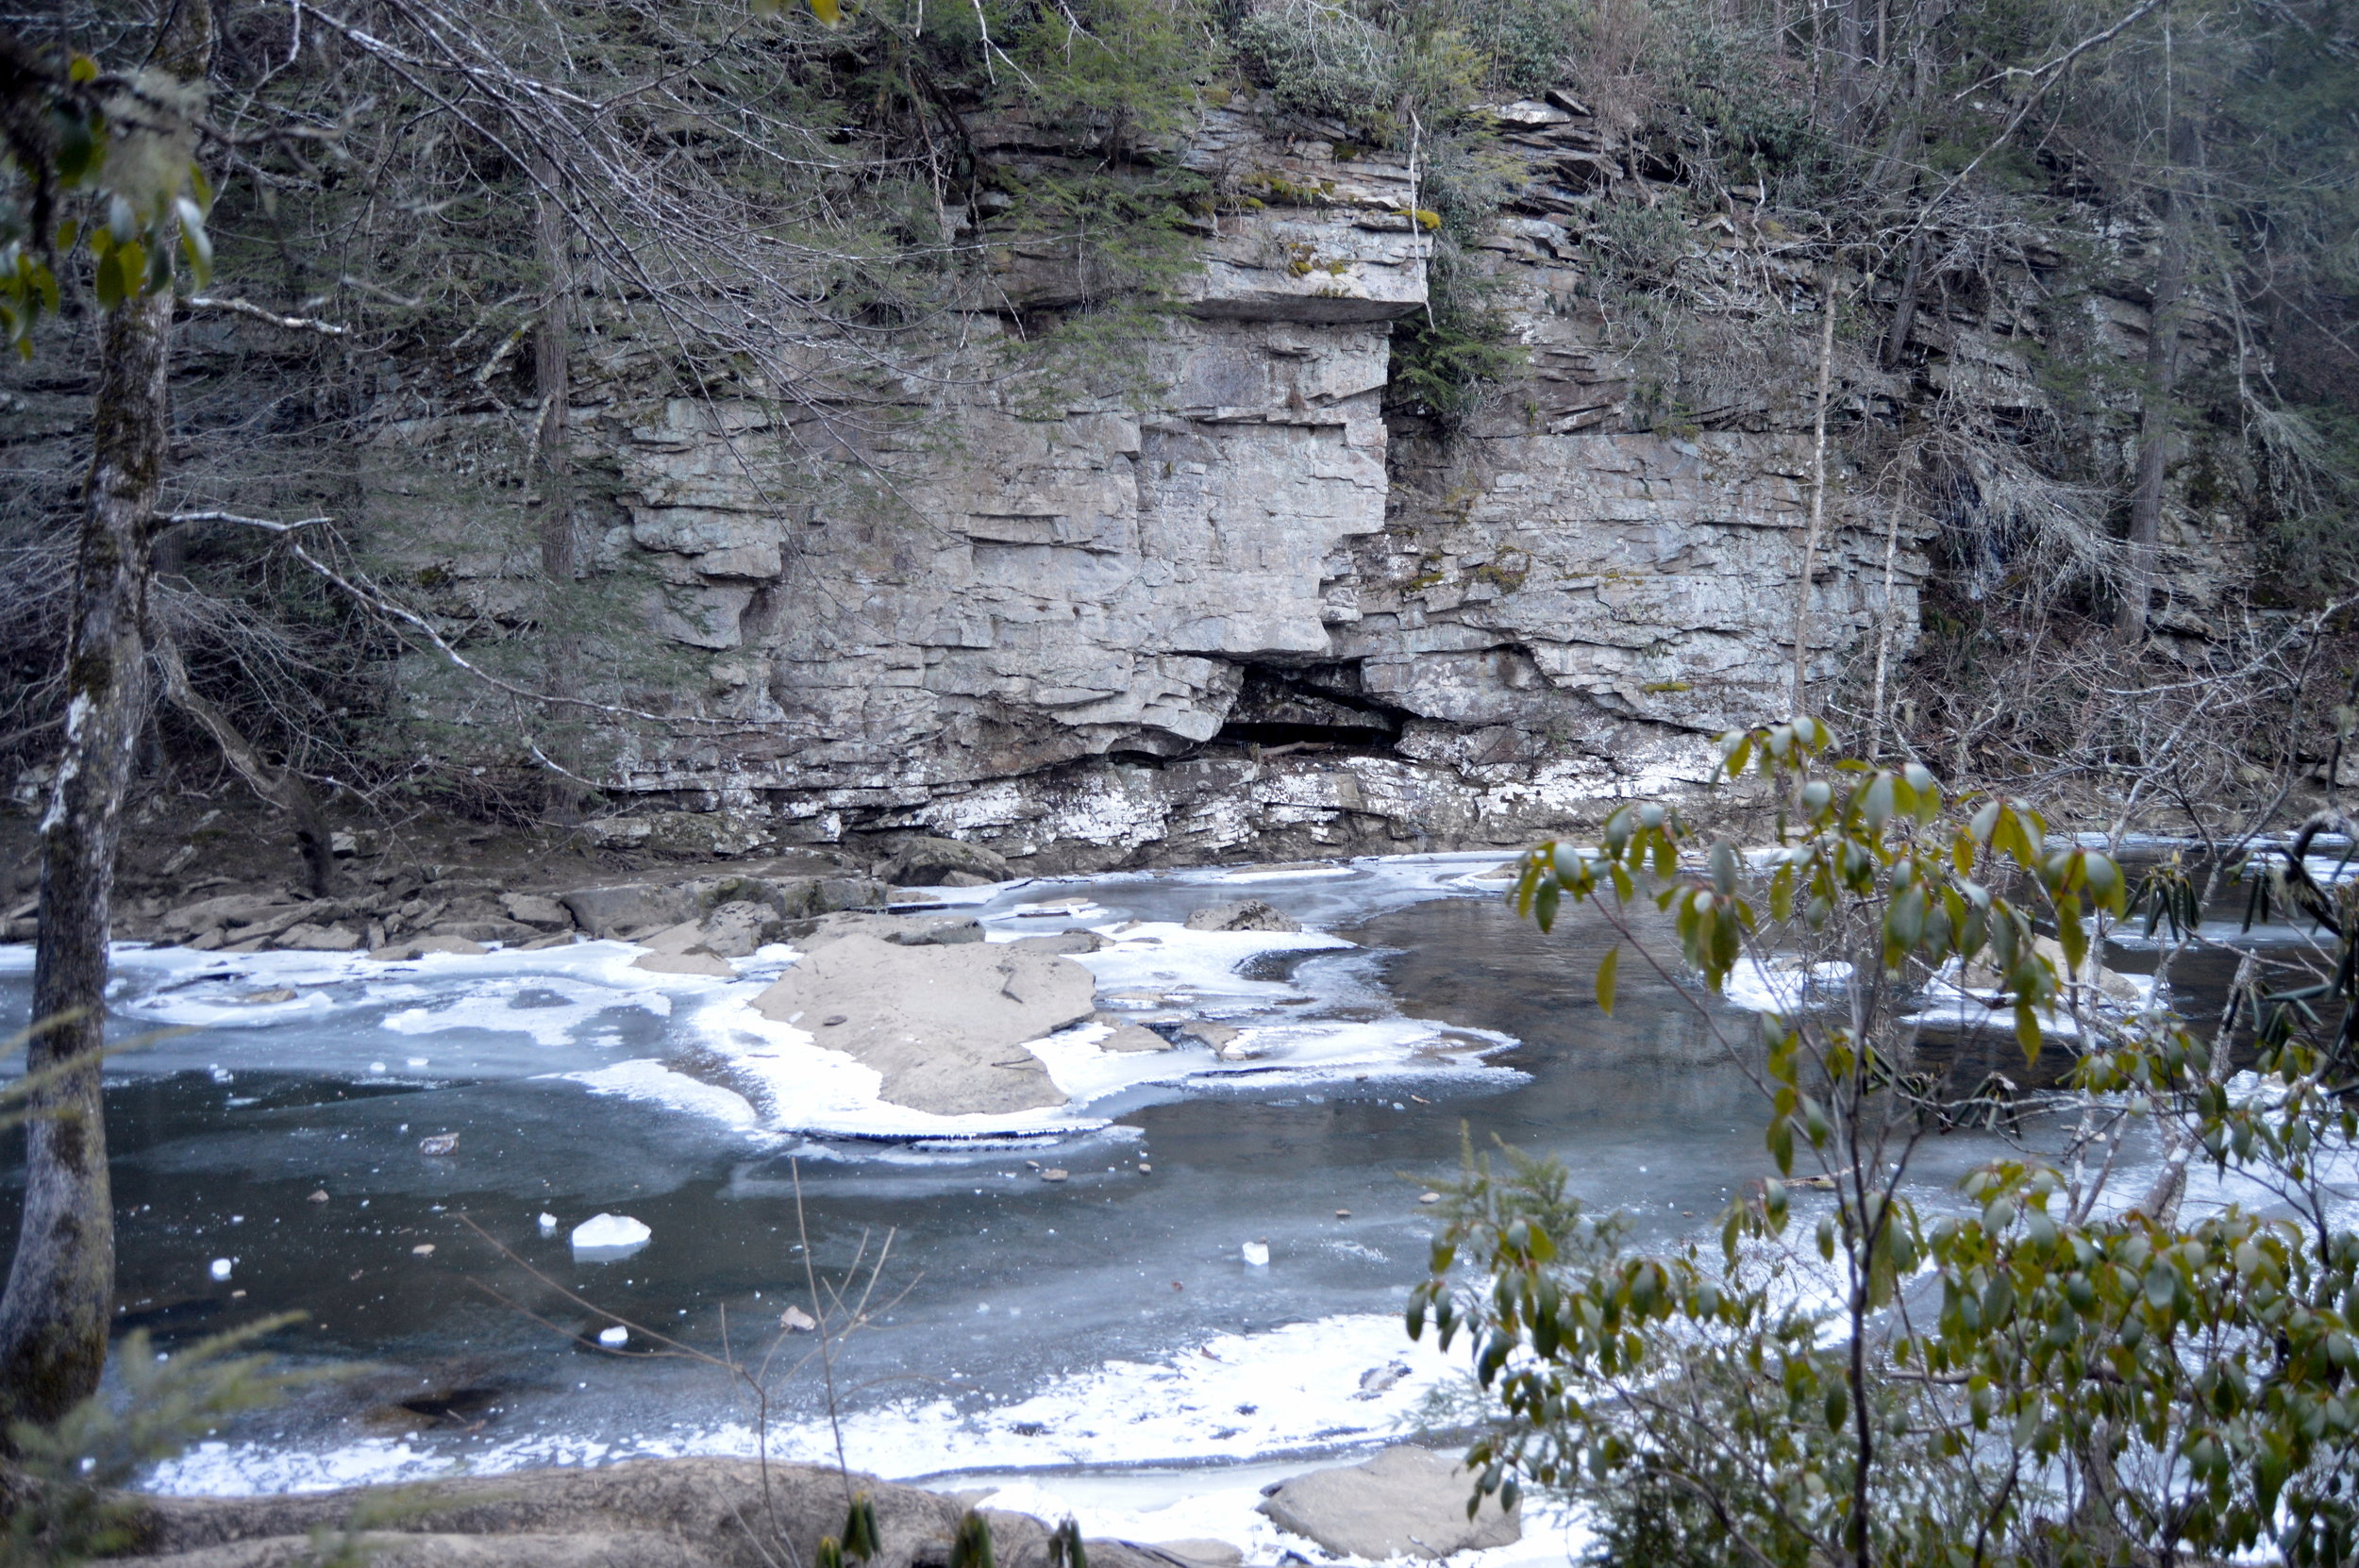  The area just above Cane Creek Cascades at Fall Creek Falls State Park. (January 2018) 